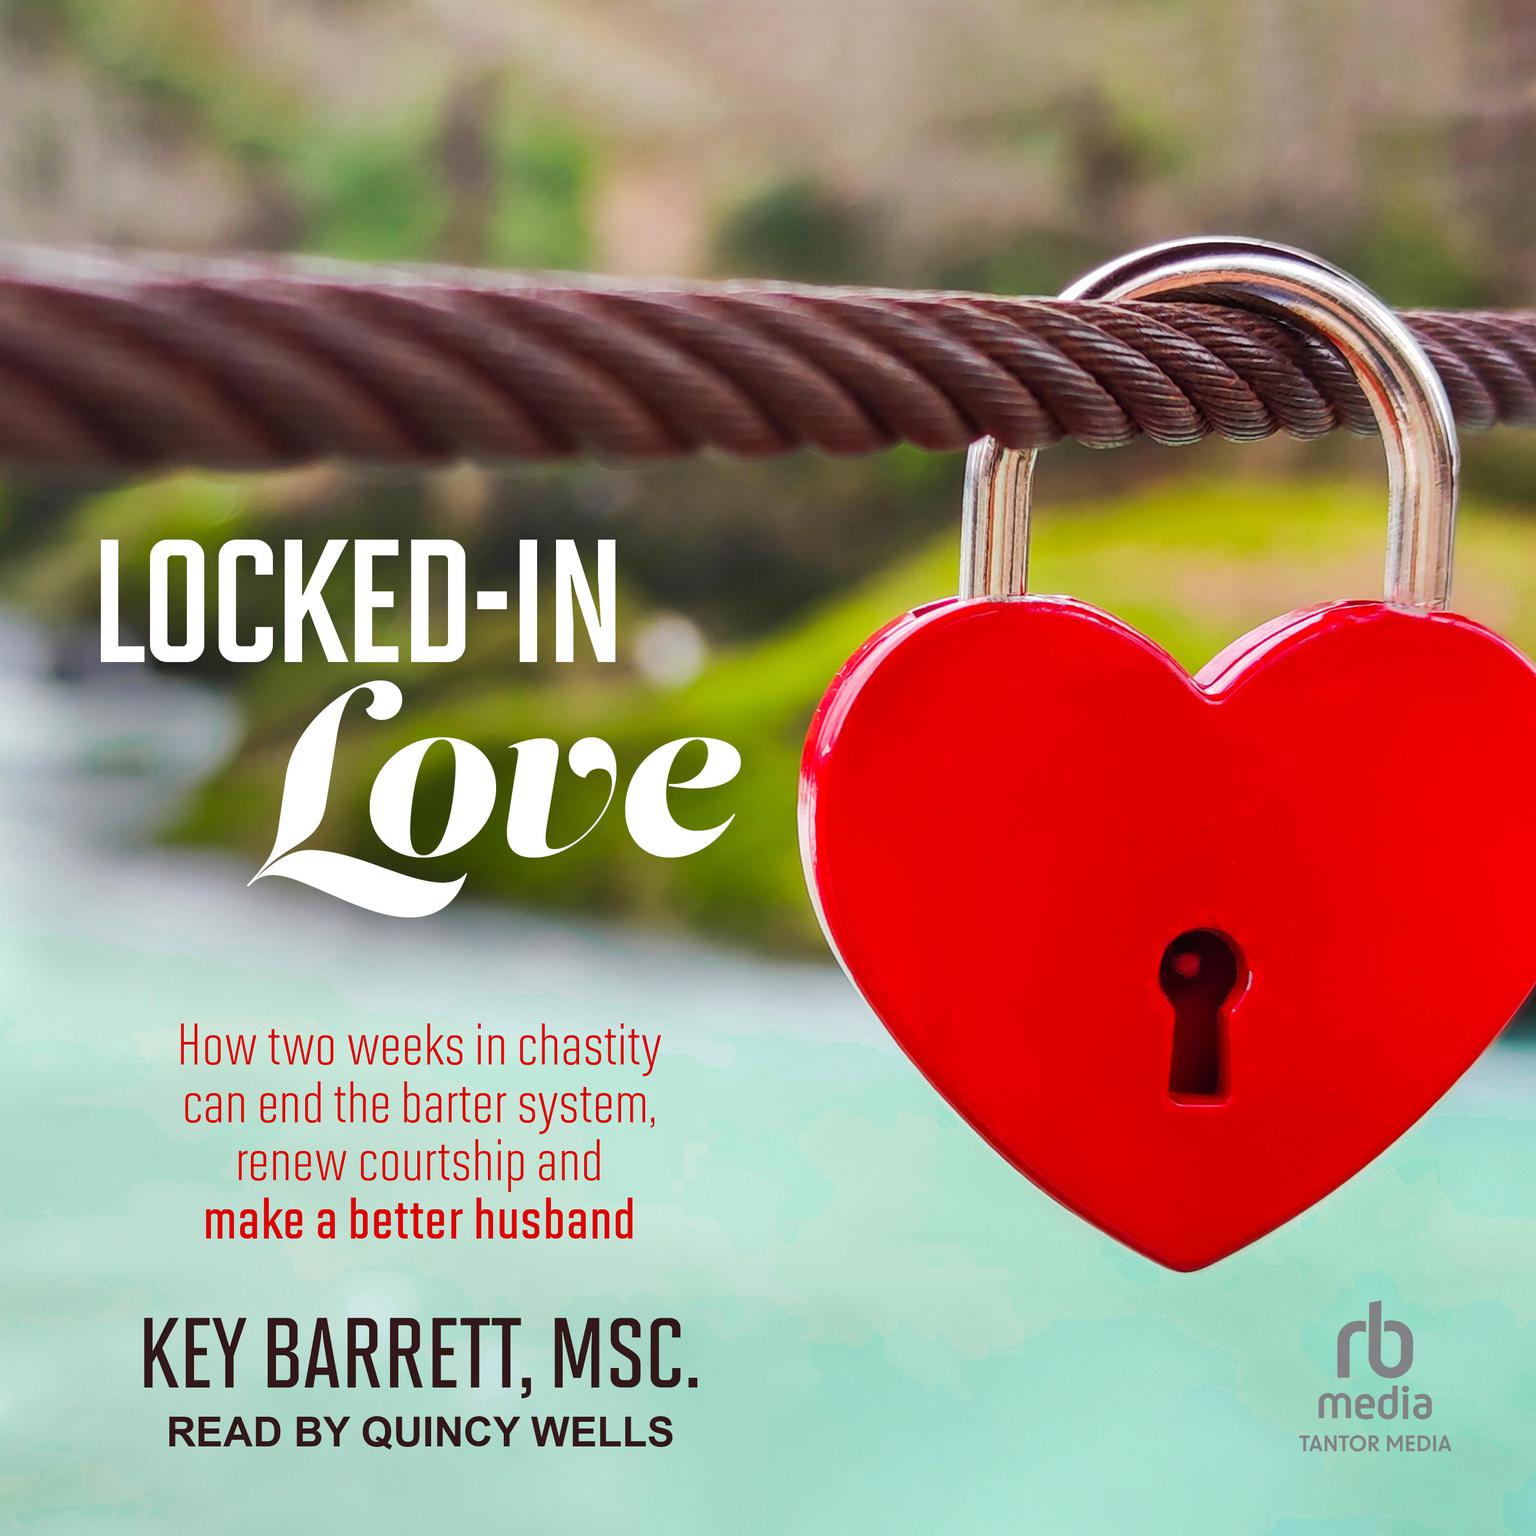 Locked-In Love: How two weeks in chastity can end the barter system, renew courtship and make a better husband Audiobook, by Key Barrett MSc